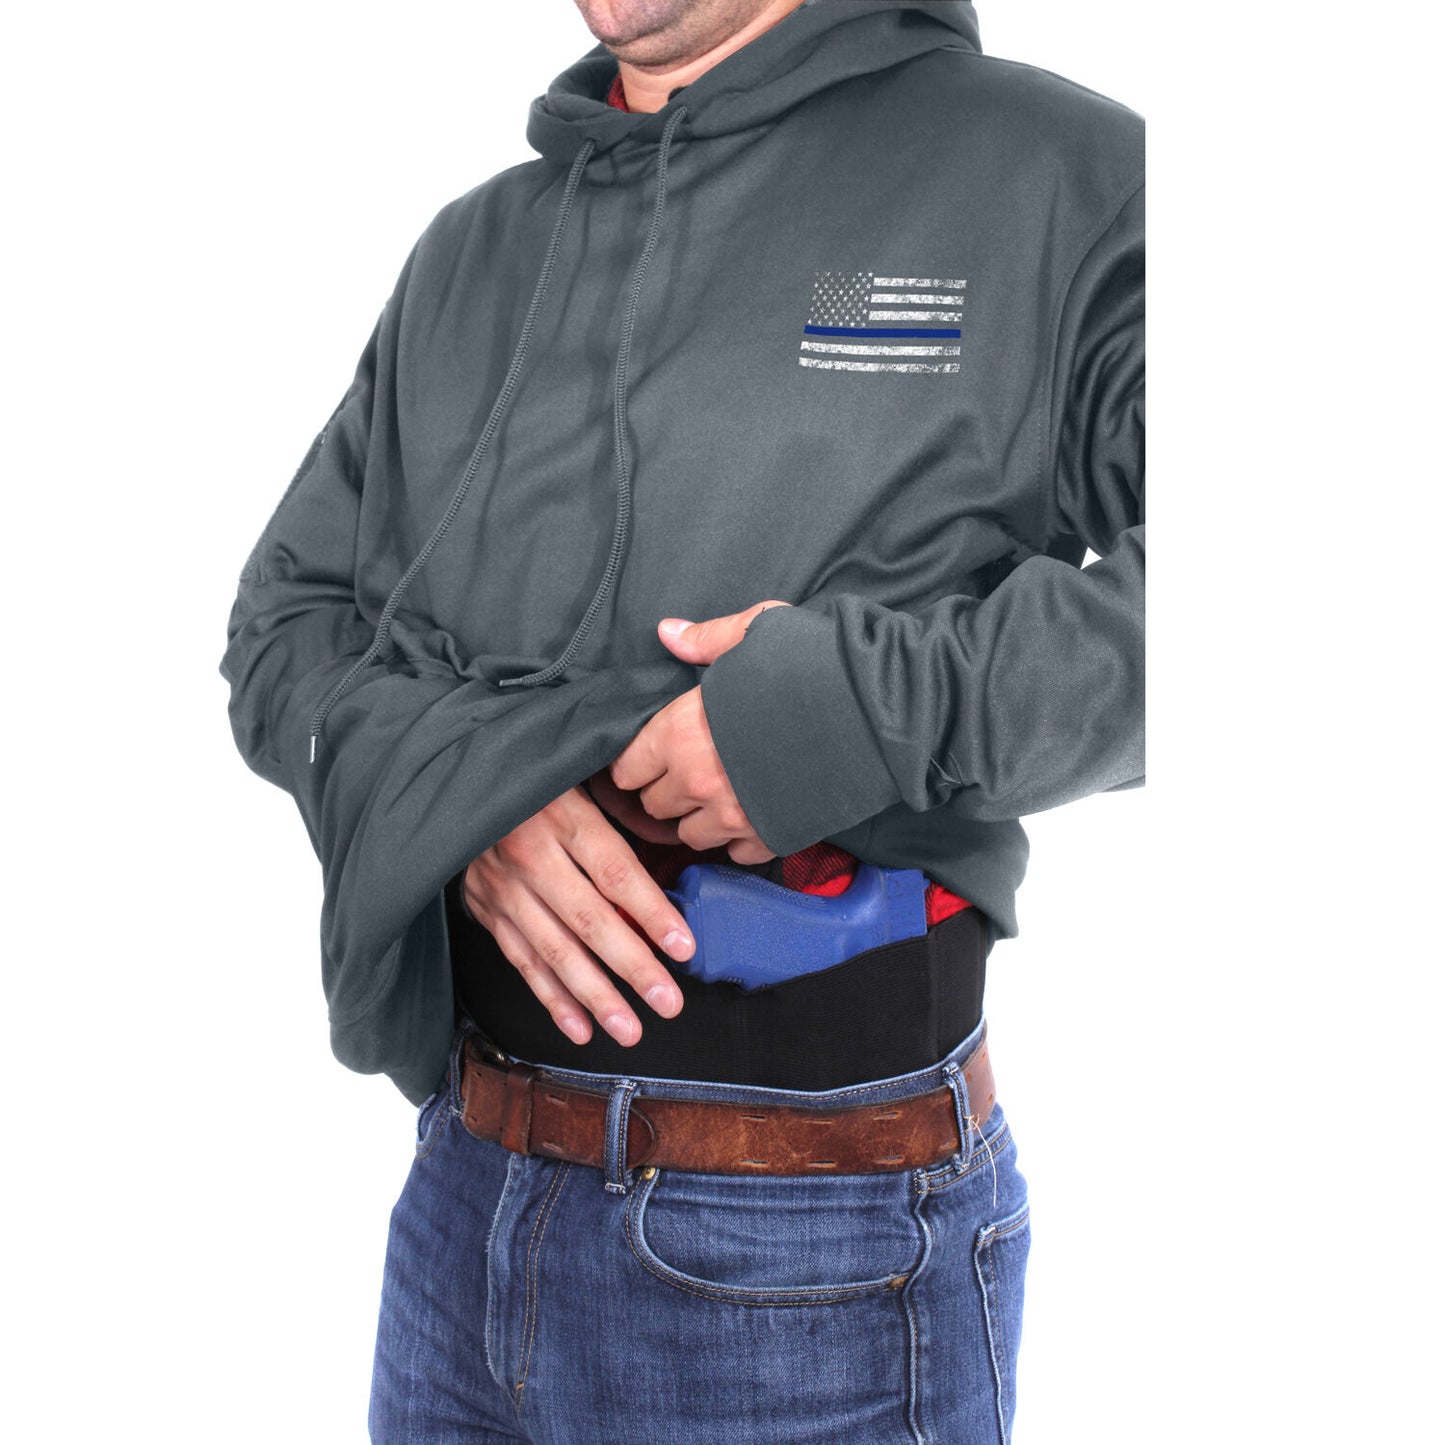 Rothco Thin Blue Line Concealed Carry Hoodie - Grey